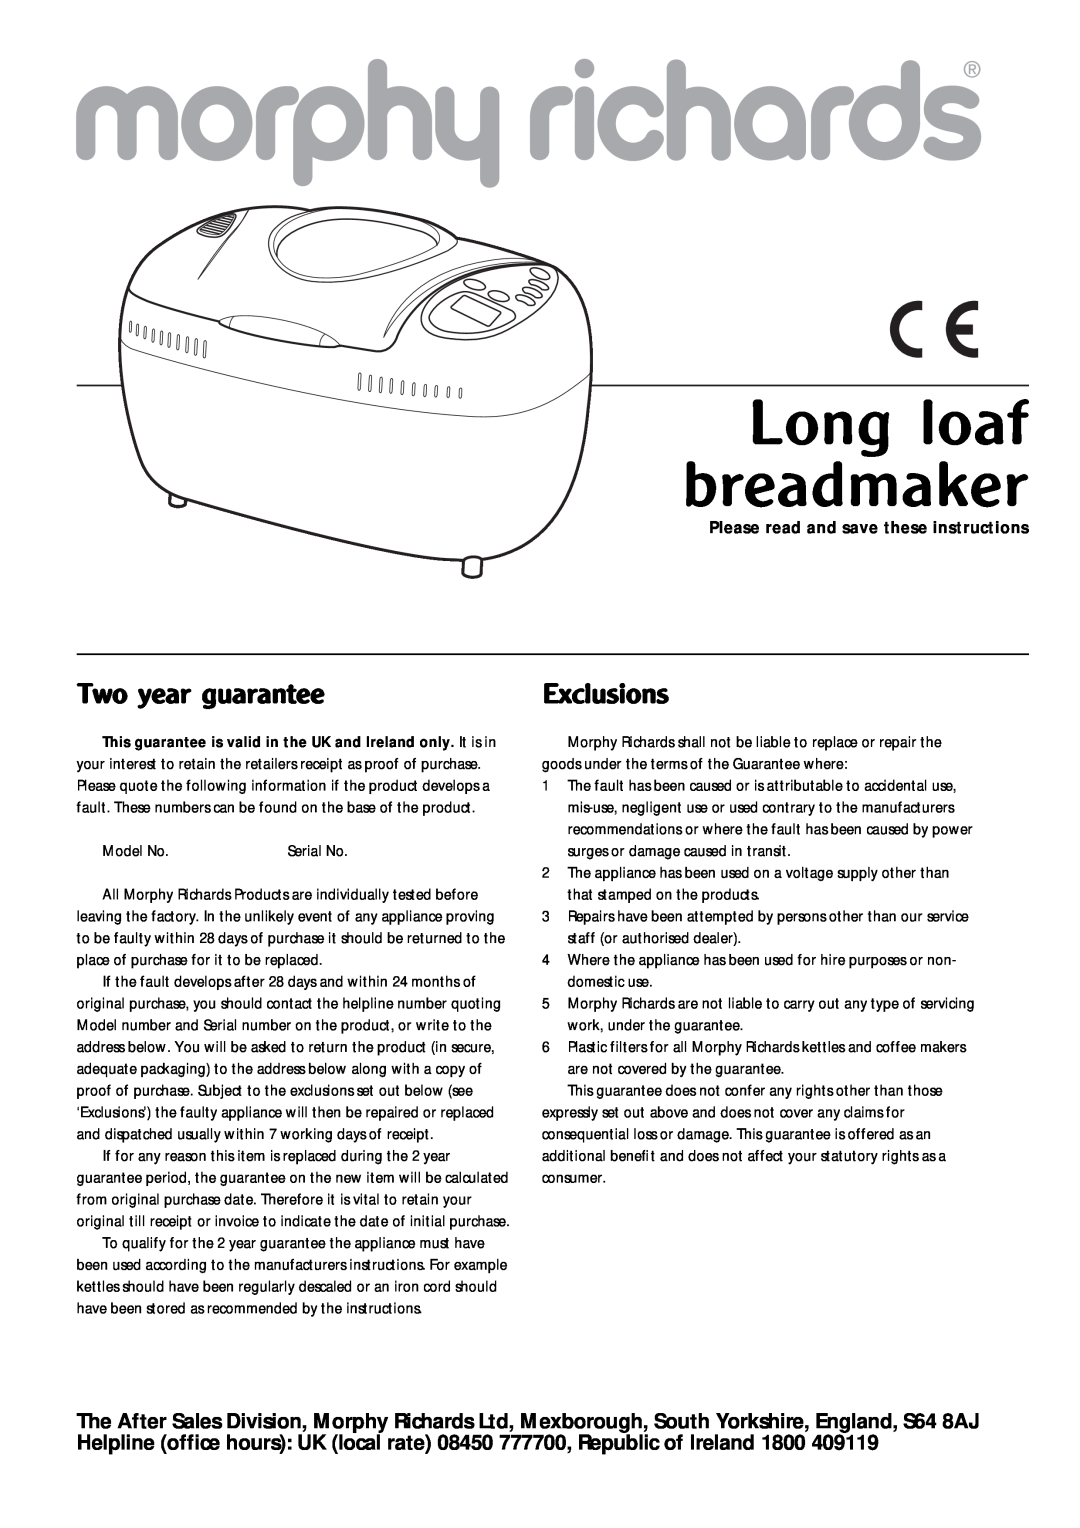 Morphy Richards Bread Maker manual Long loaf breadmaker, Two year guarantee, Please read and save these instructions 